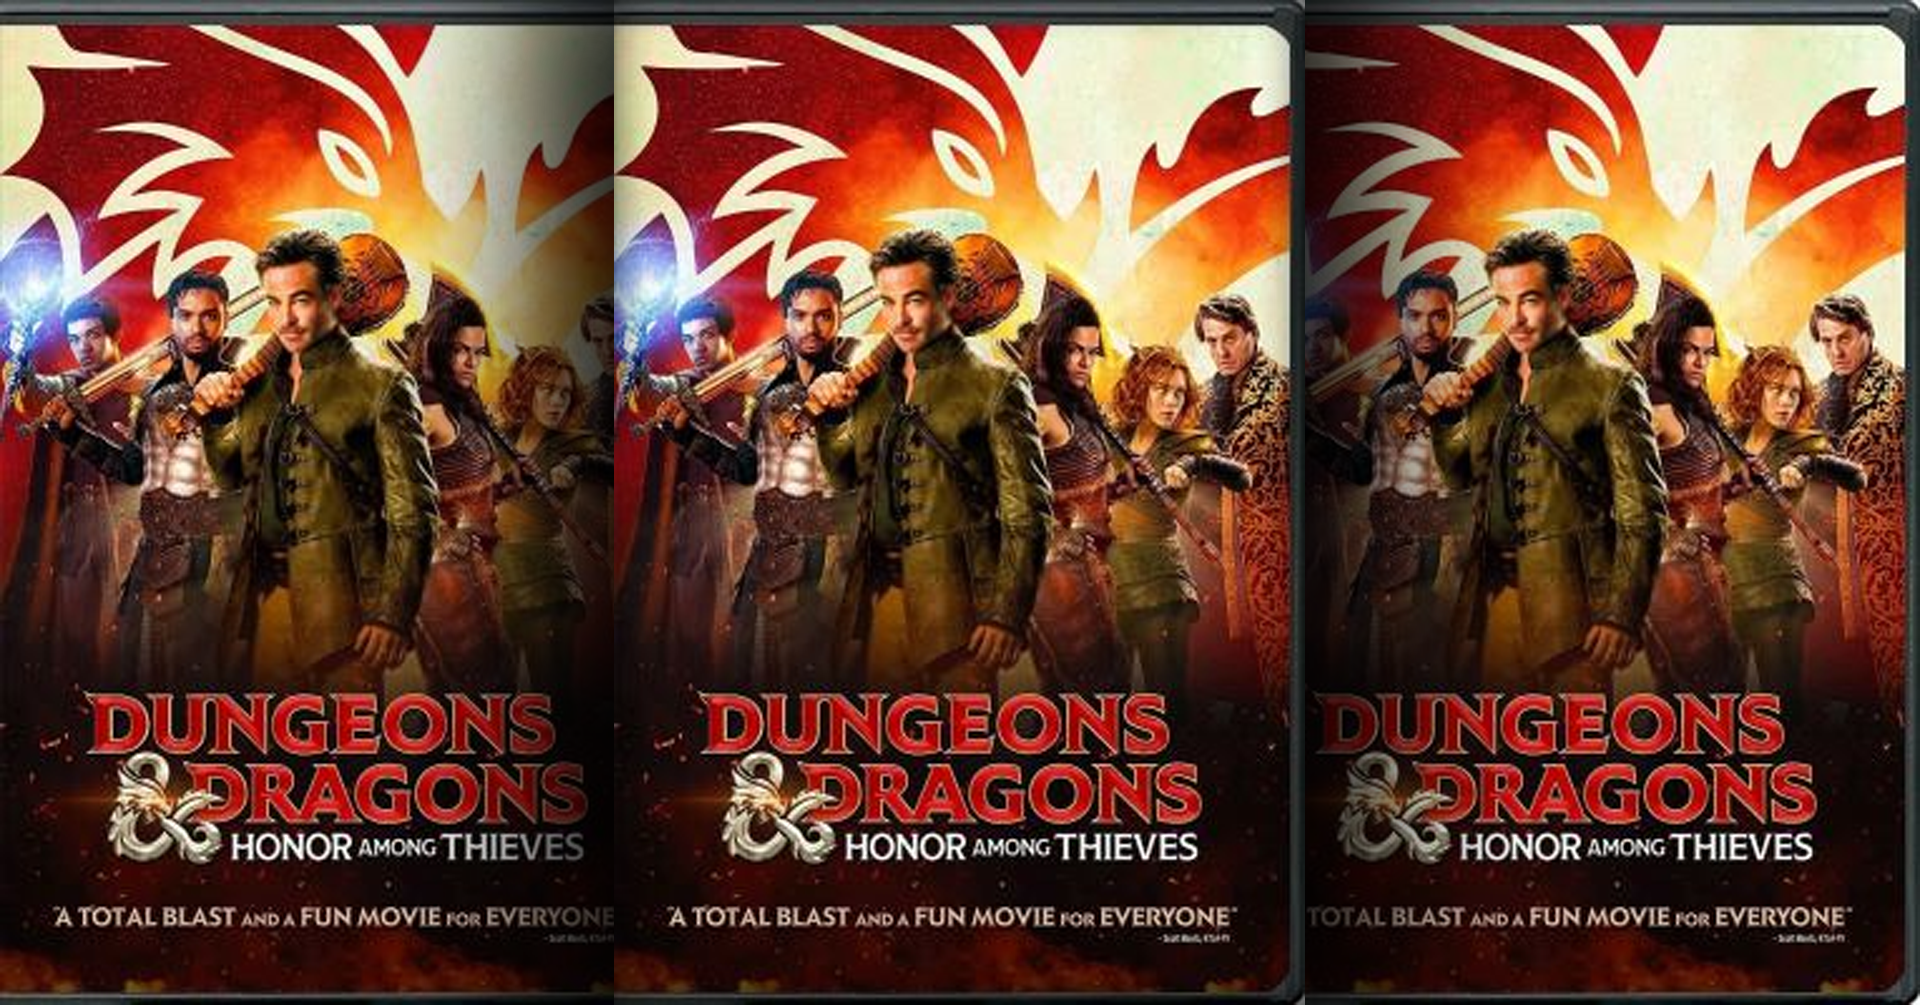 Dungeons and Dragons Honor Among Thieves (DVD cover)